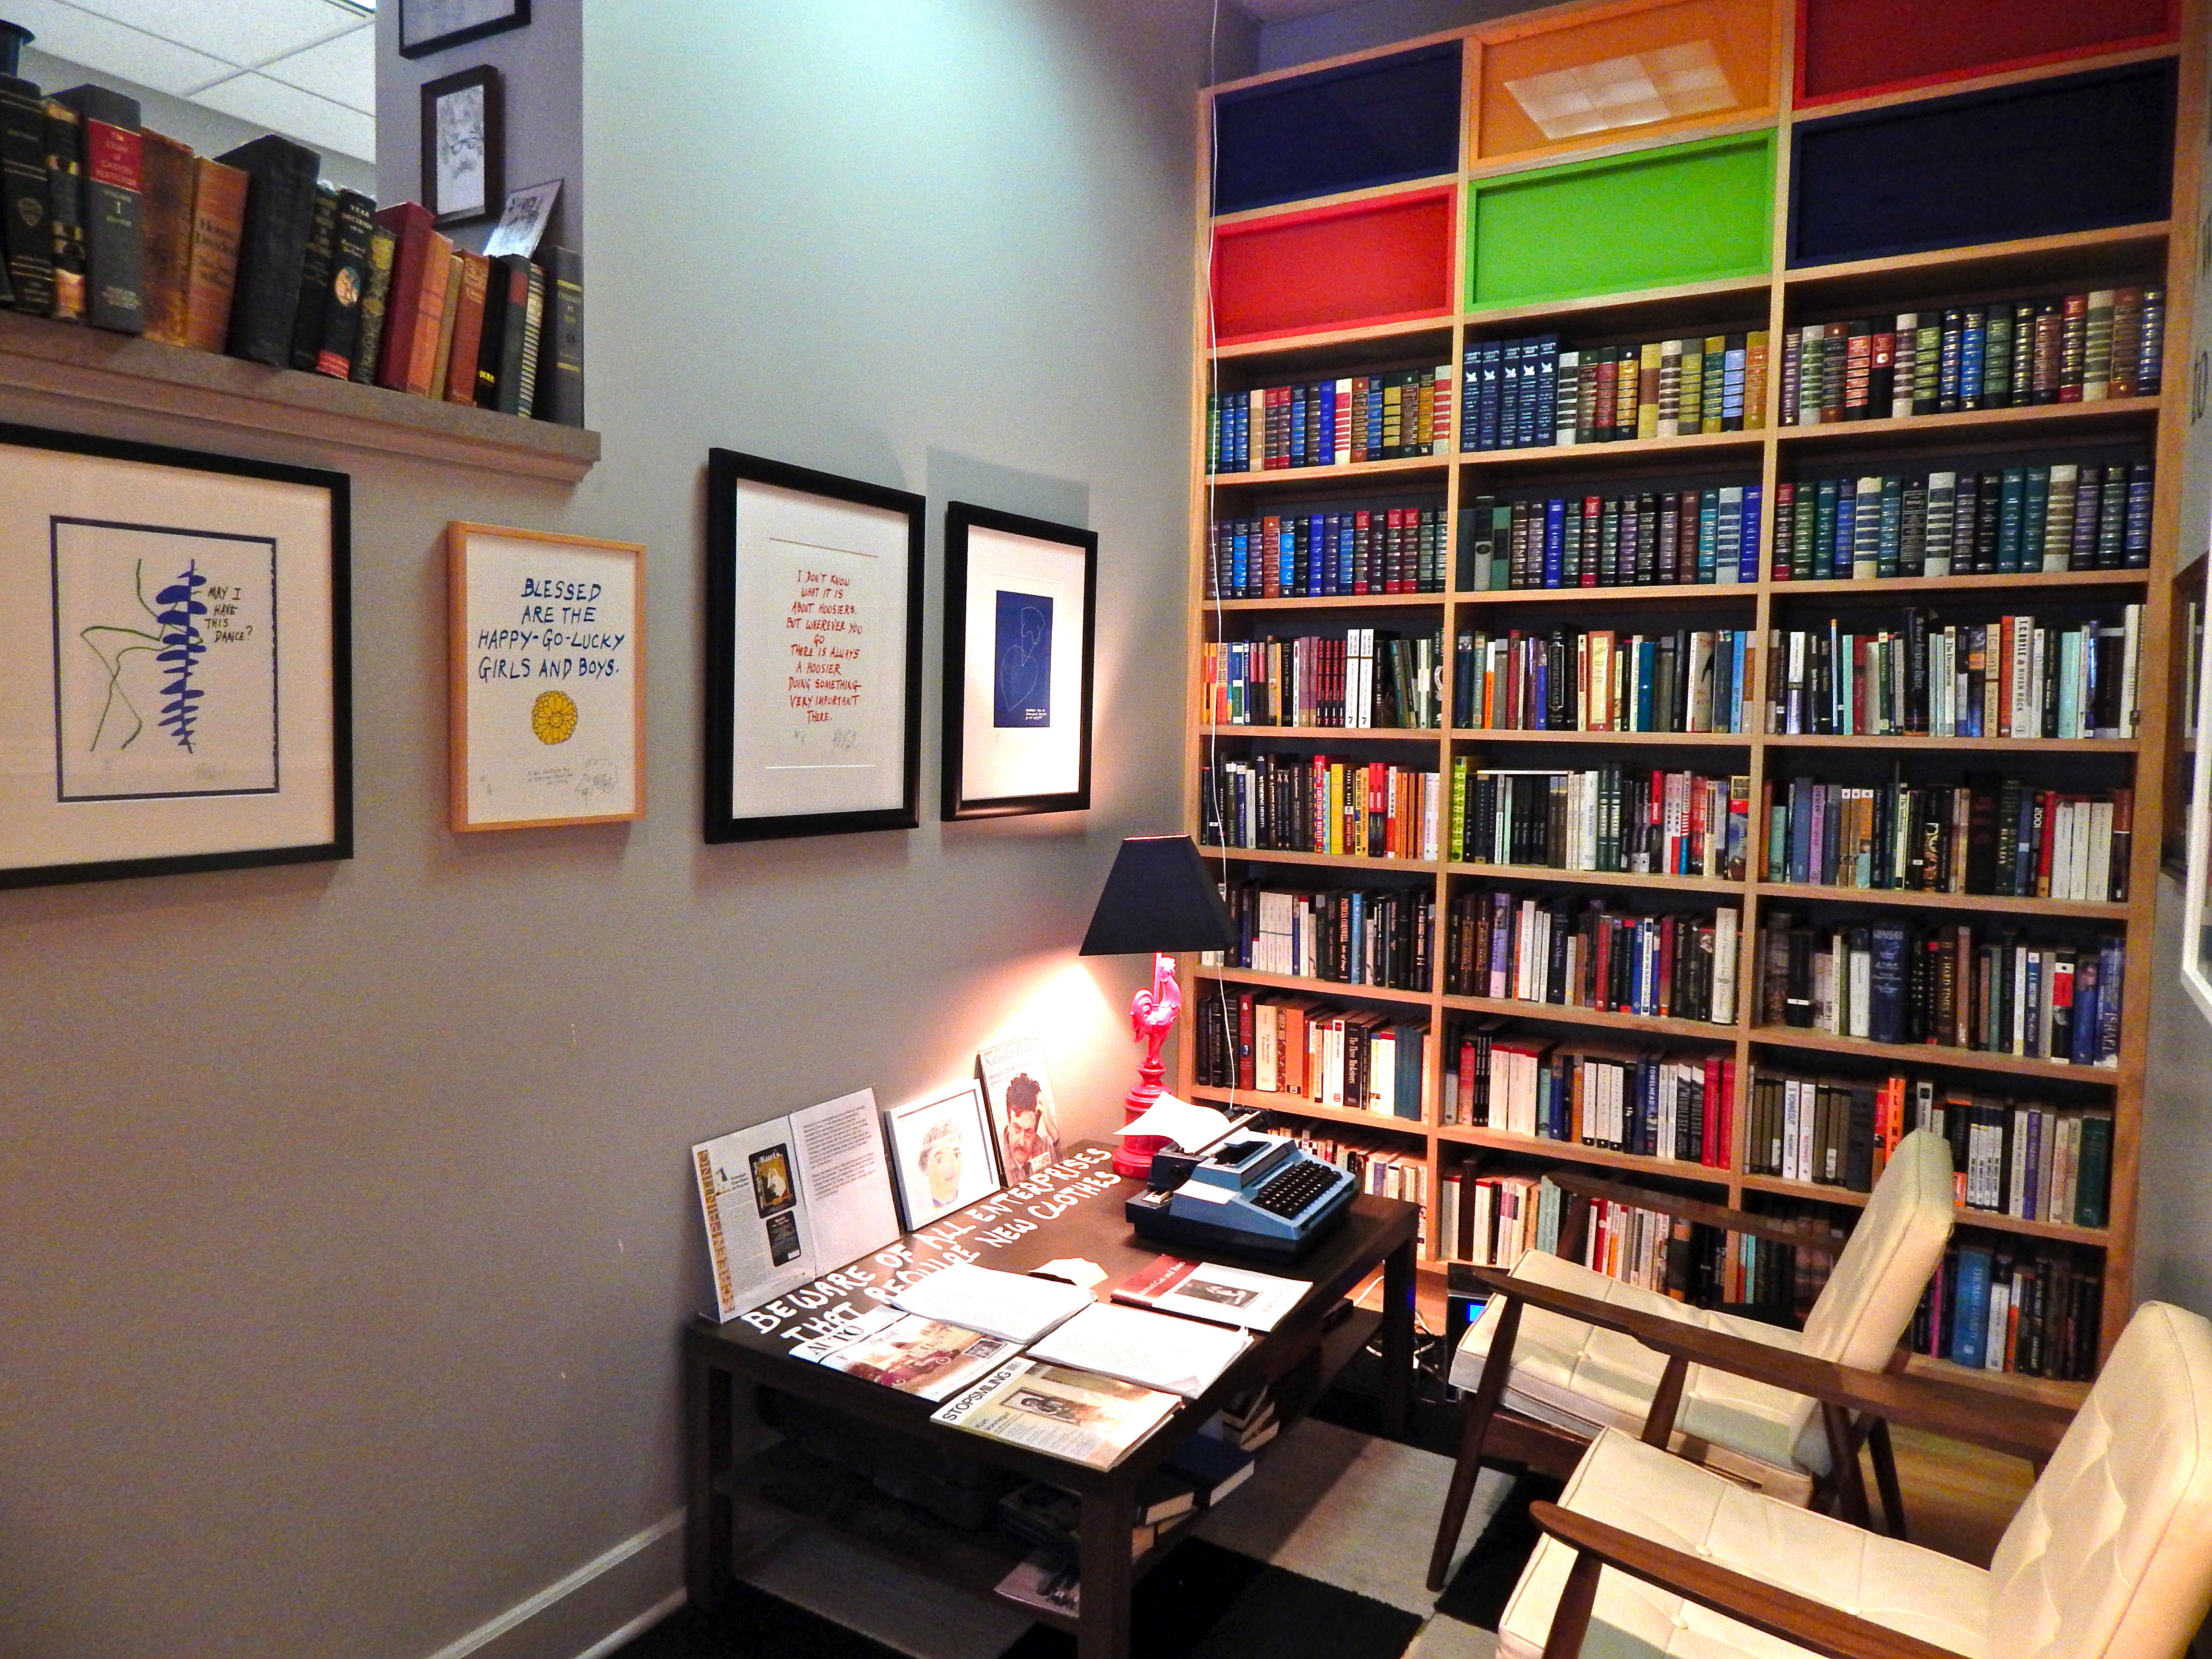 Kurt Vonnegut's study, which includes his desk, a bookshelf, and his red rooster lamp.